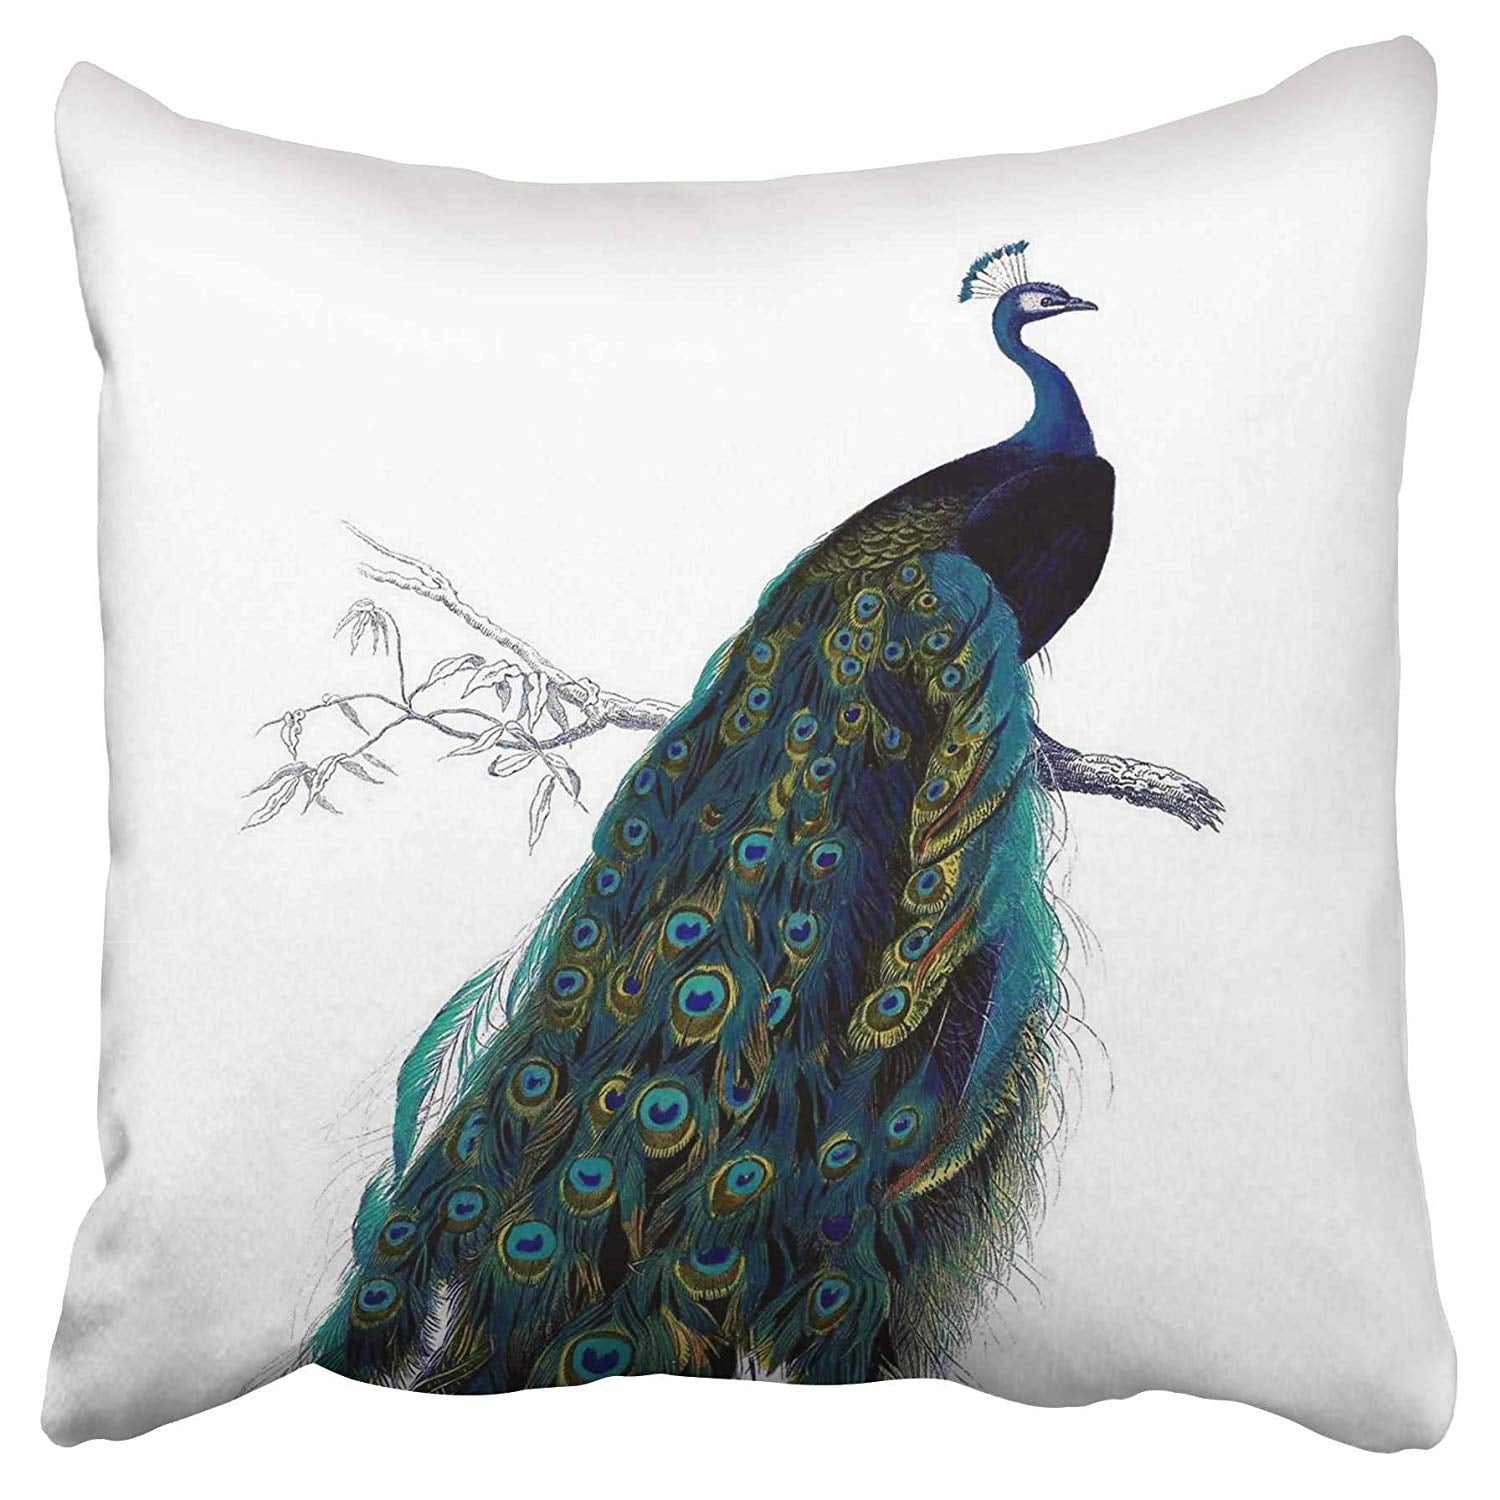 Nordic Peacock Pillow Case Cushion Cover Pillow Cases Decorative Cushion well Sofa G8V1 